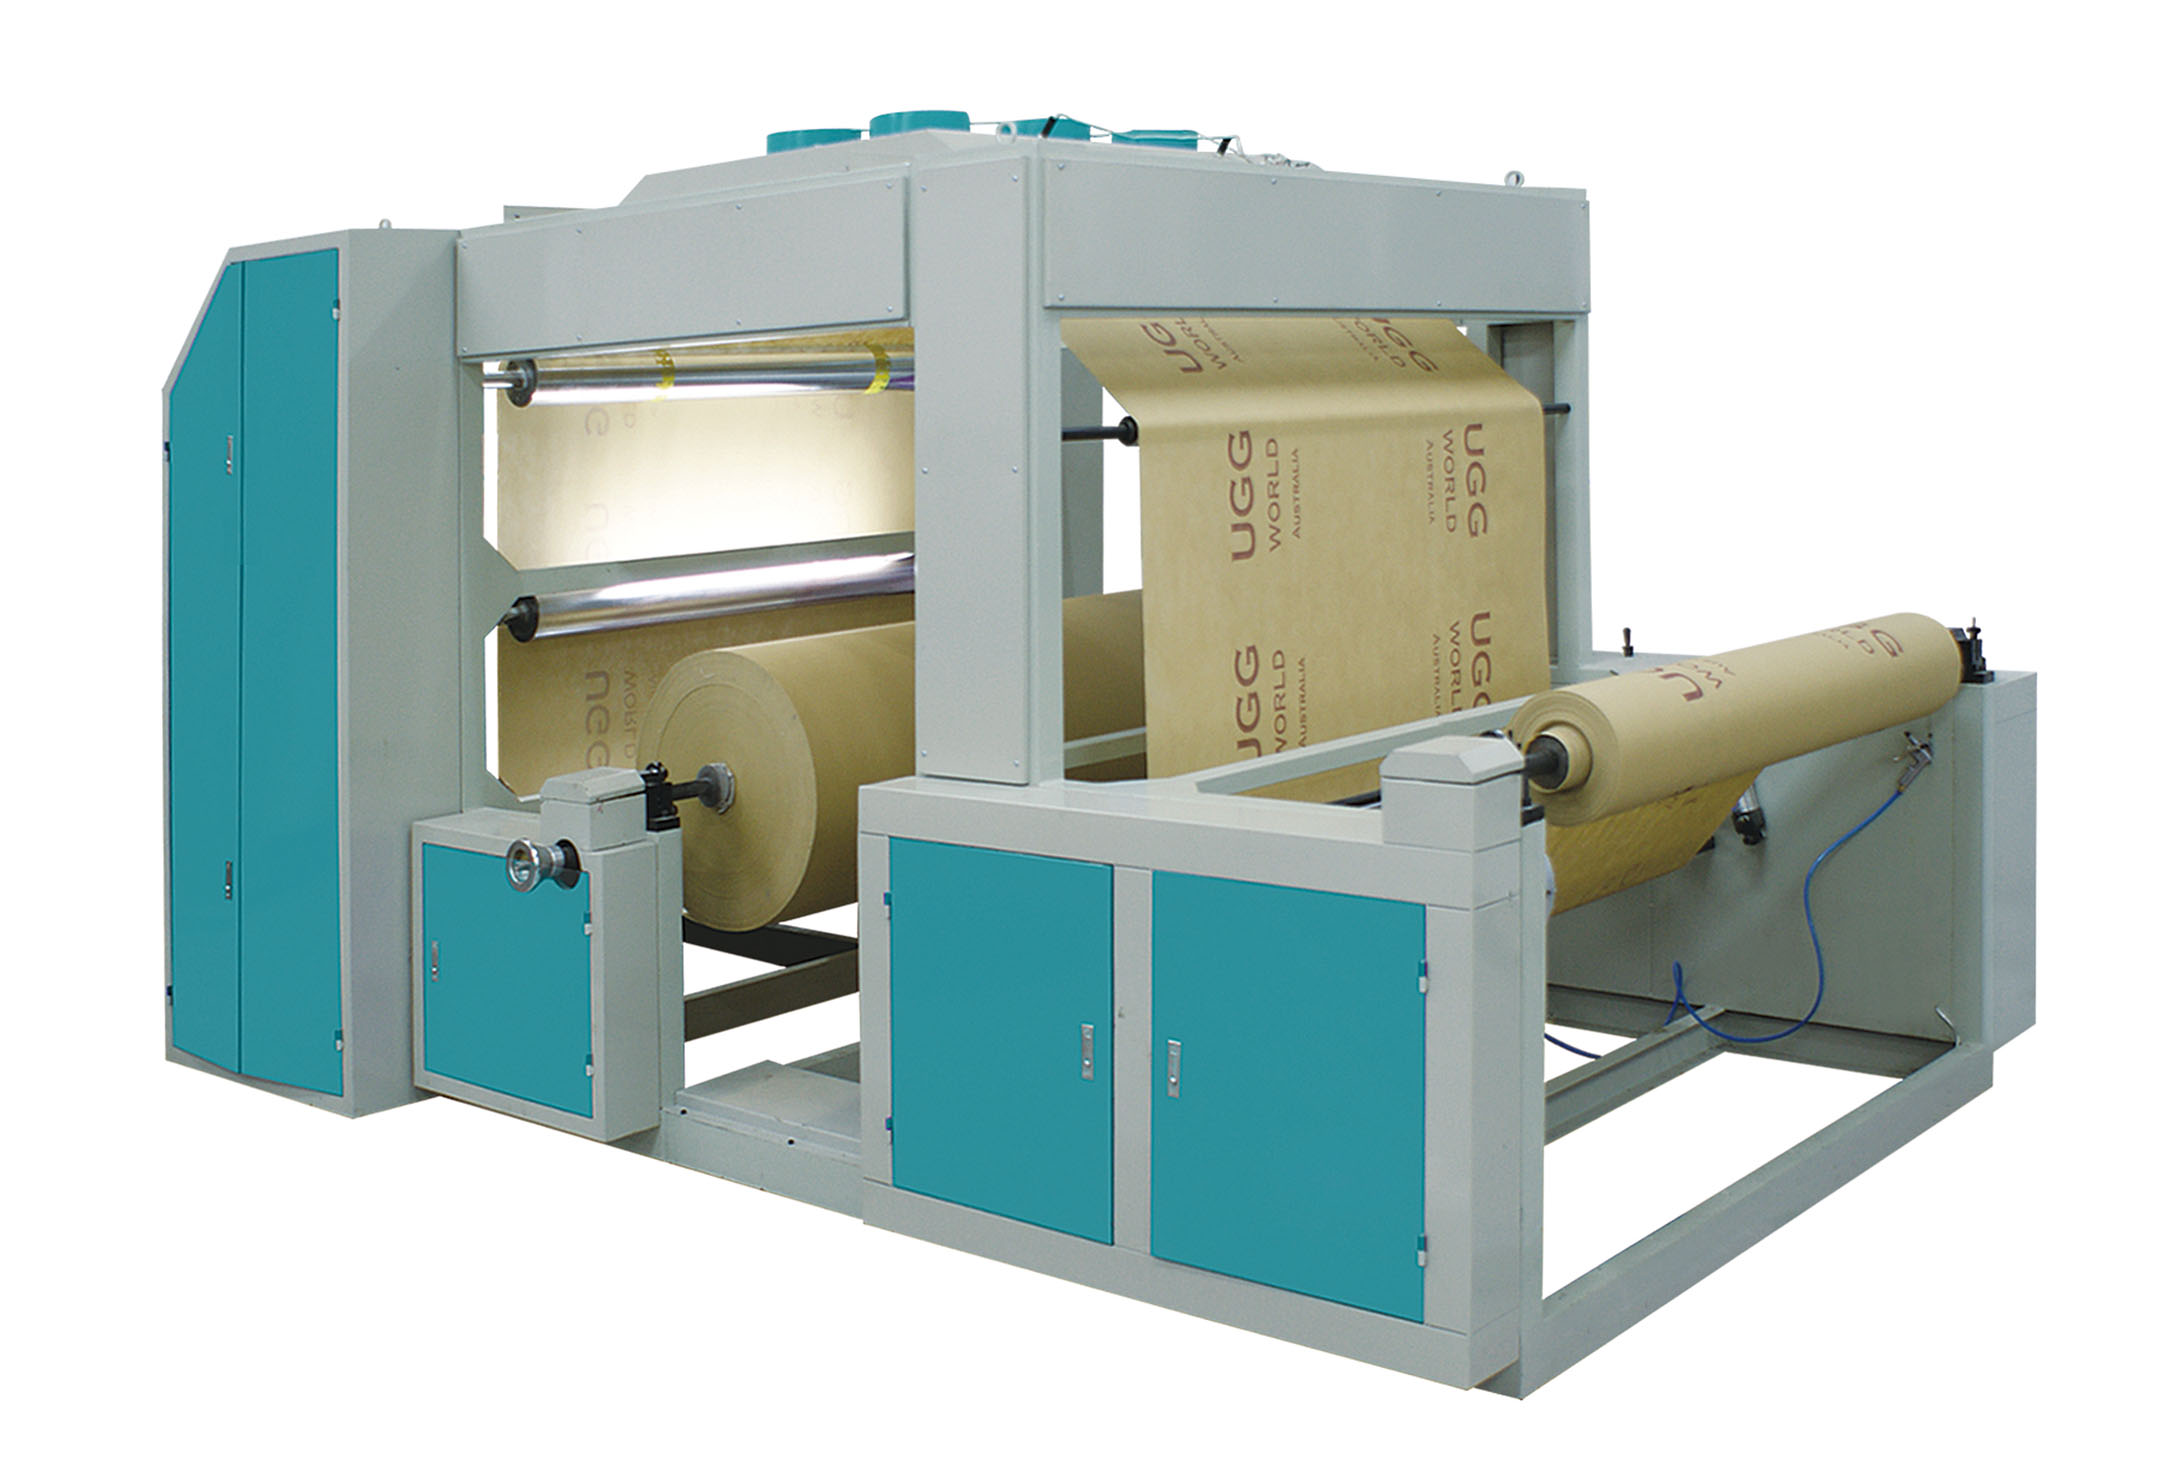 Fully Automatic Nonwoven printing machine